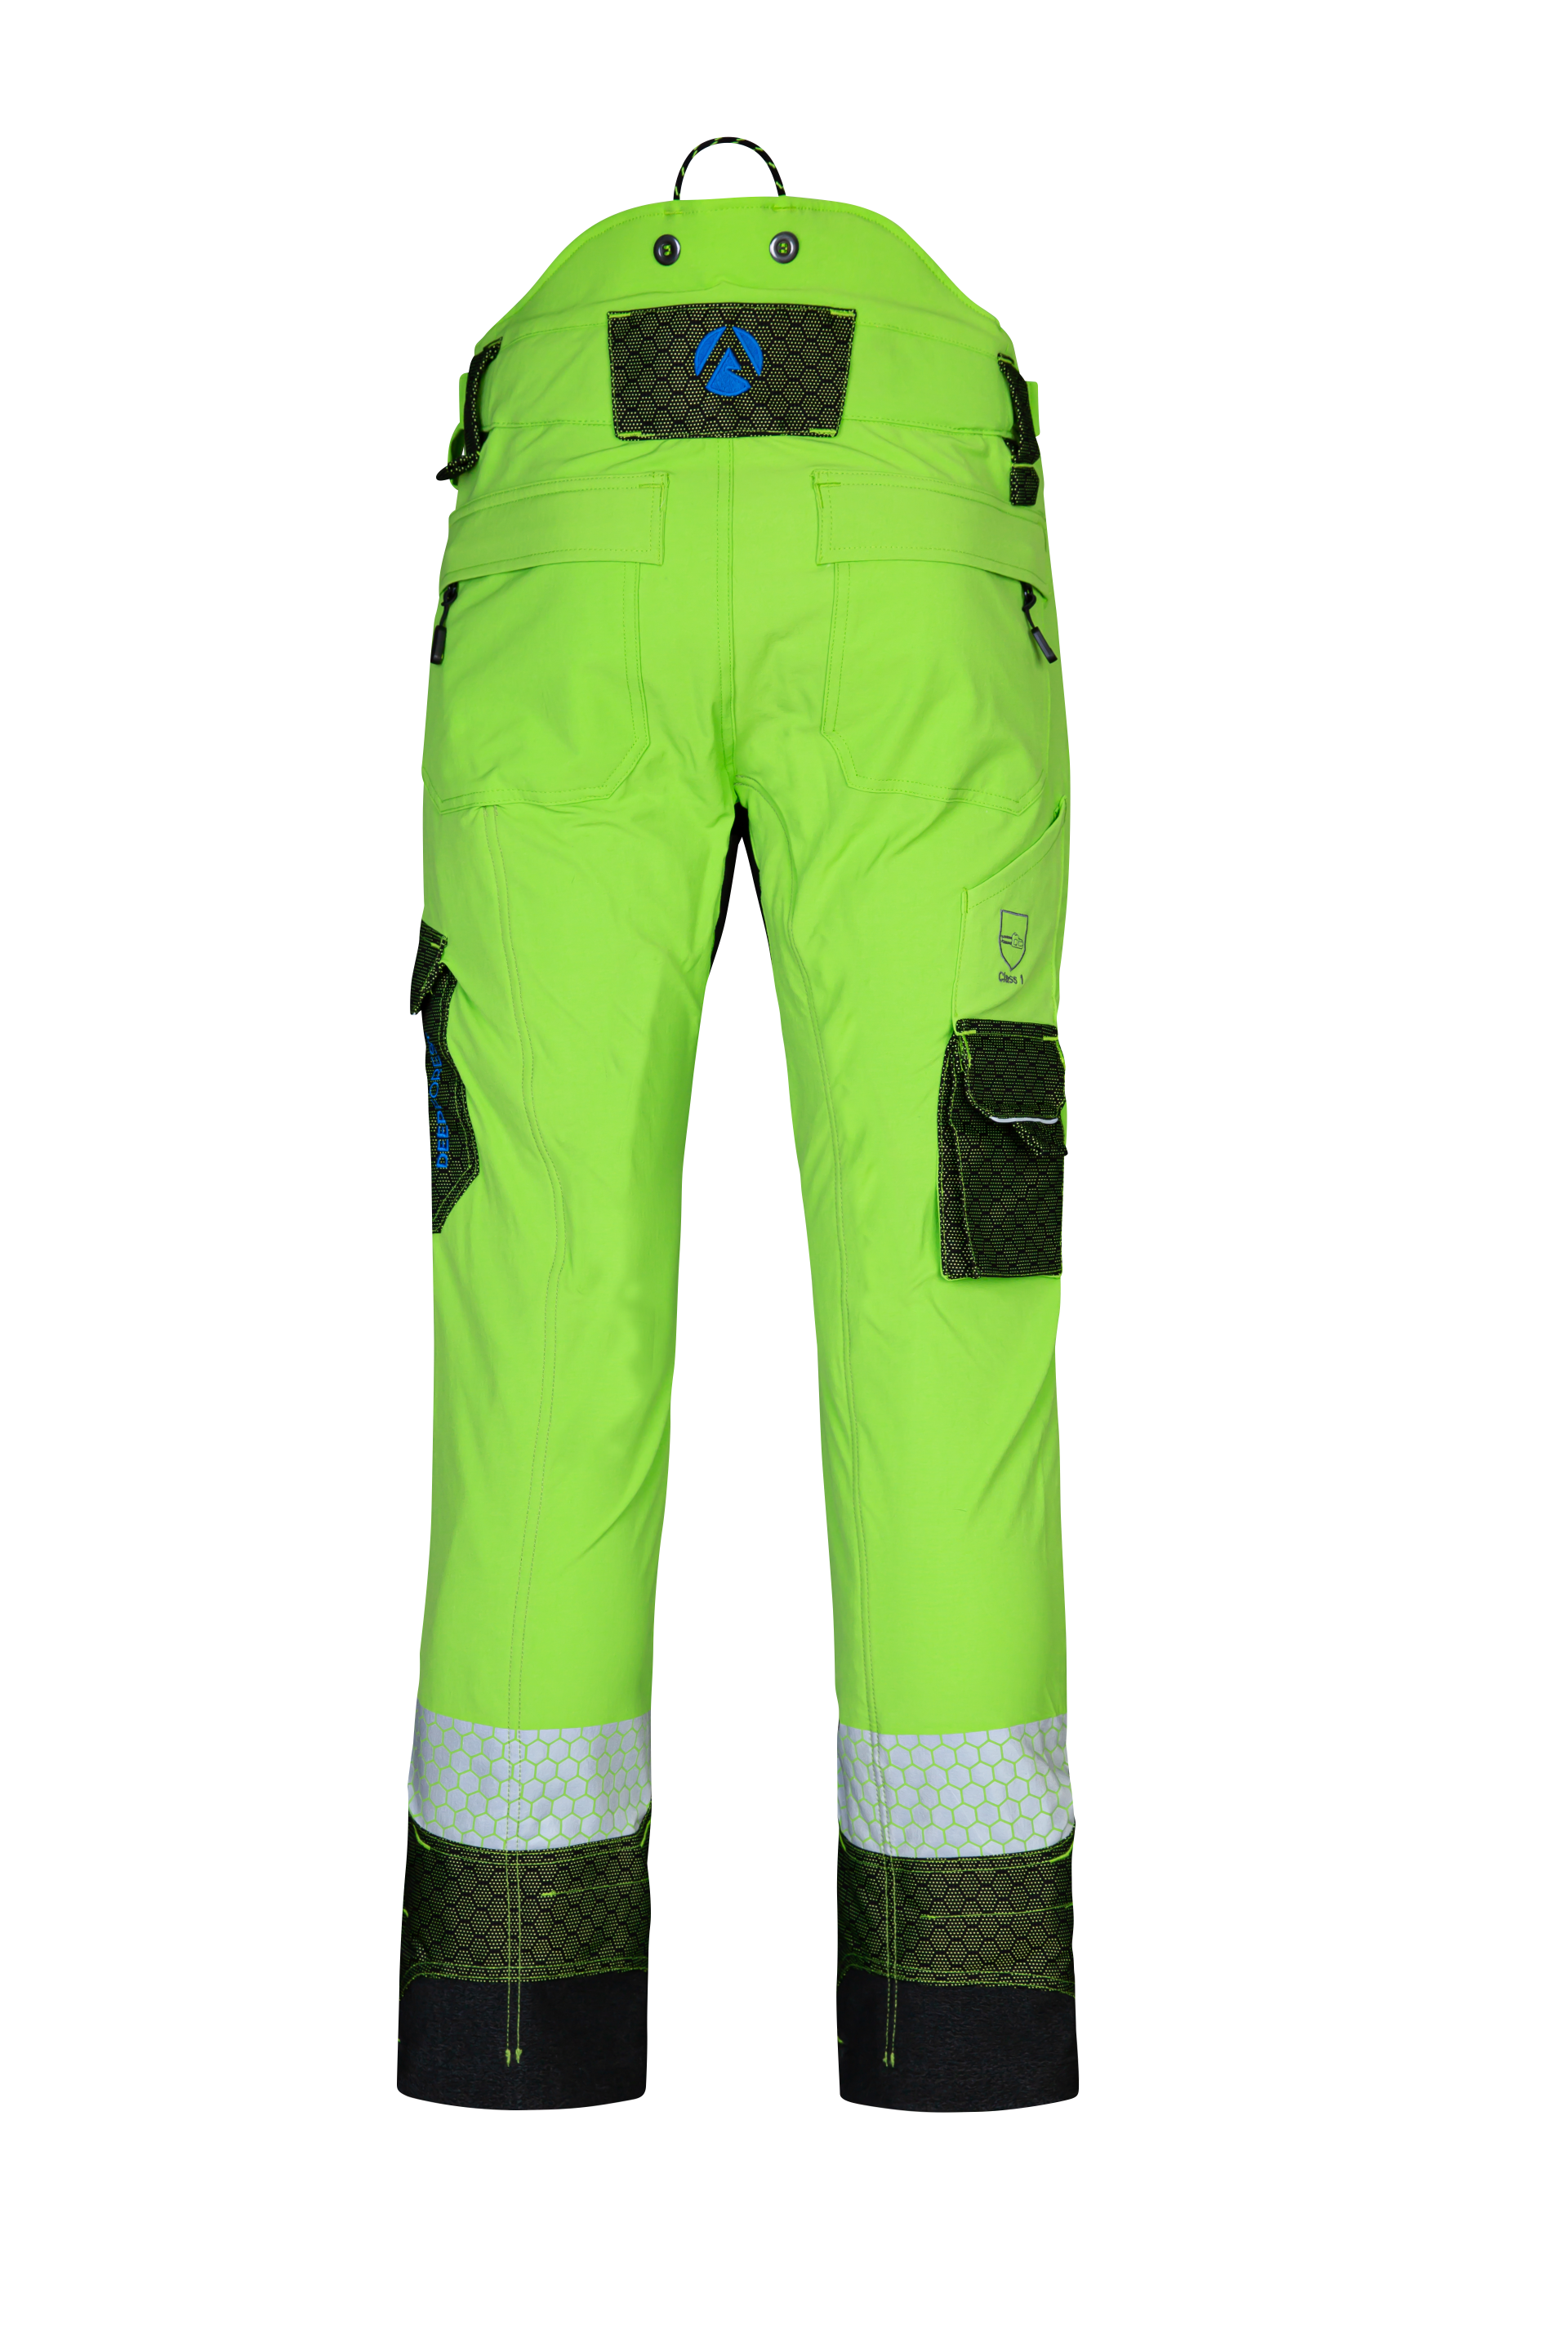 AT4090 - Arbortec Deep Forest Chainsaw Trousers Design C/Class 1 - Lime